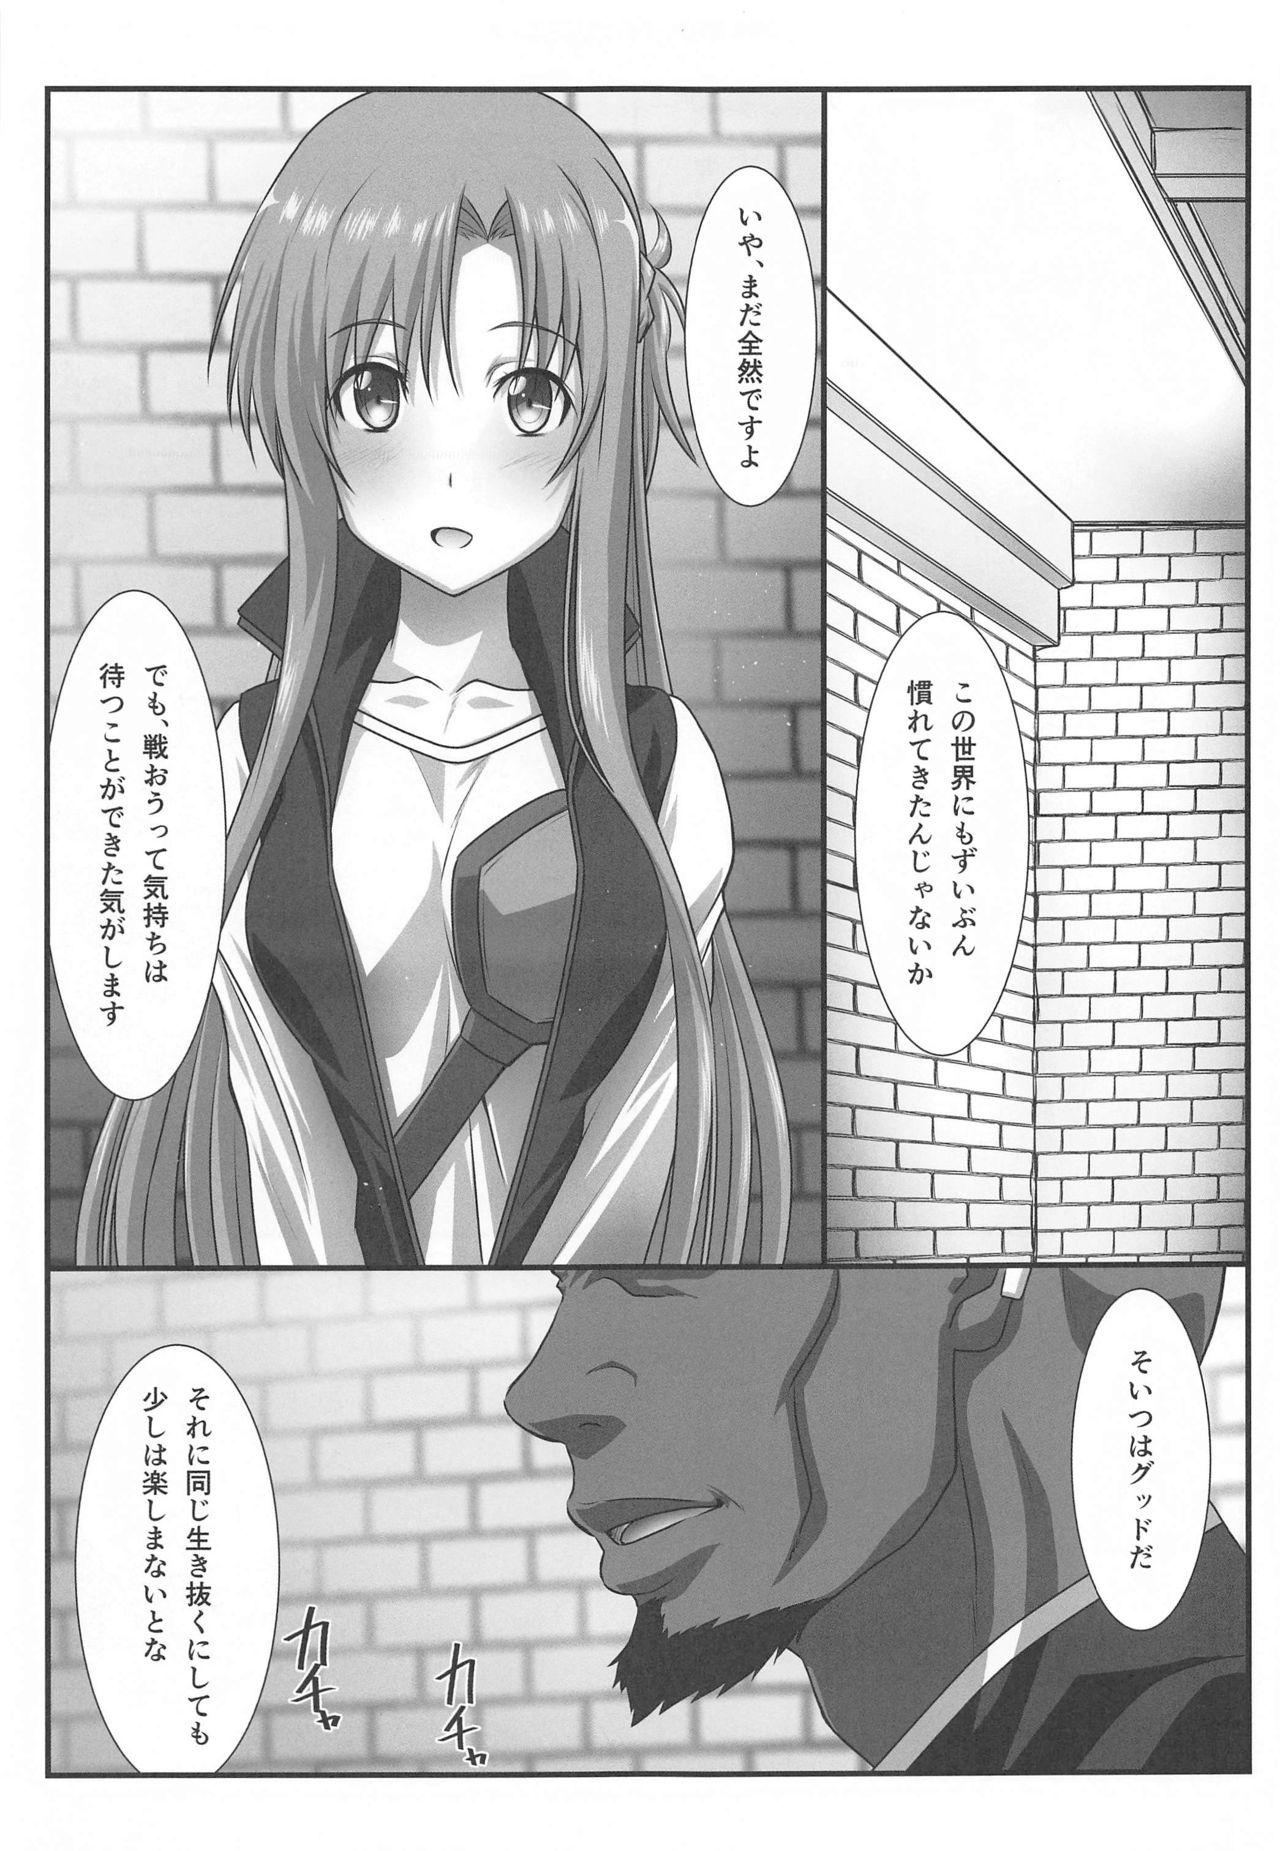 Teen Astral Bout Ver. 44 - Sword art online Parties - Page 8